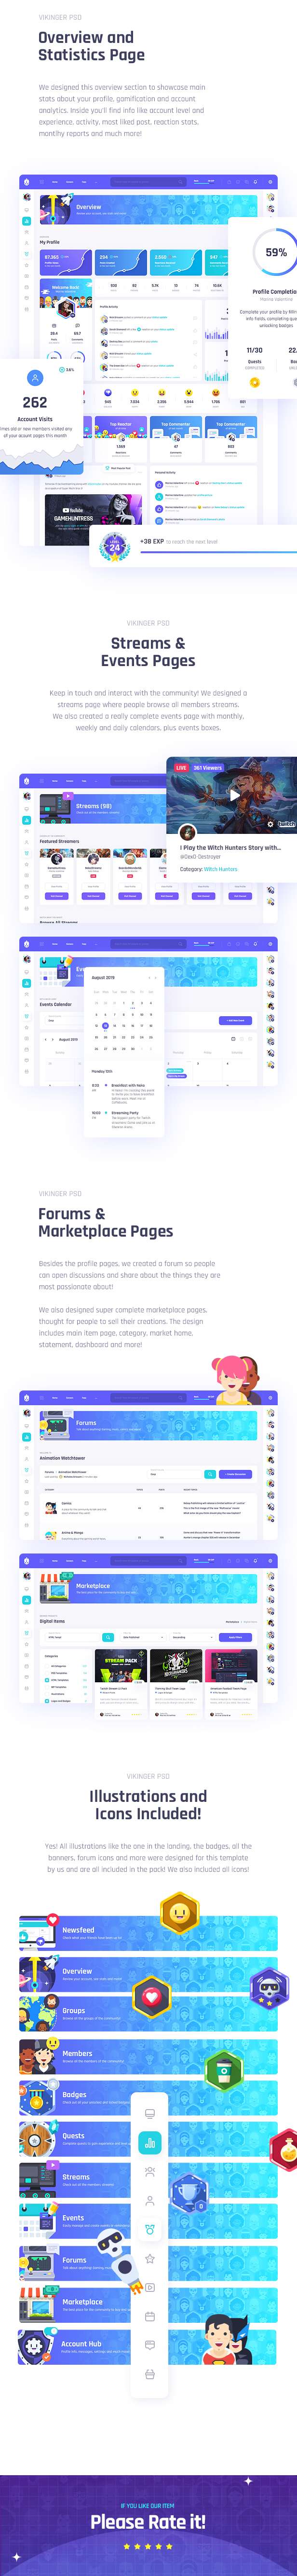 Vikinger - Social Network and Marketplace PSD Template - 12